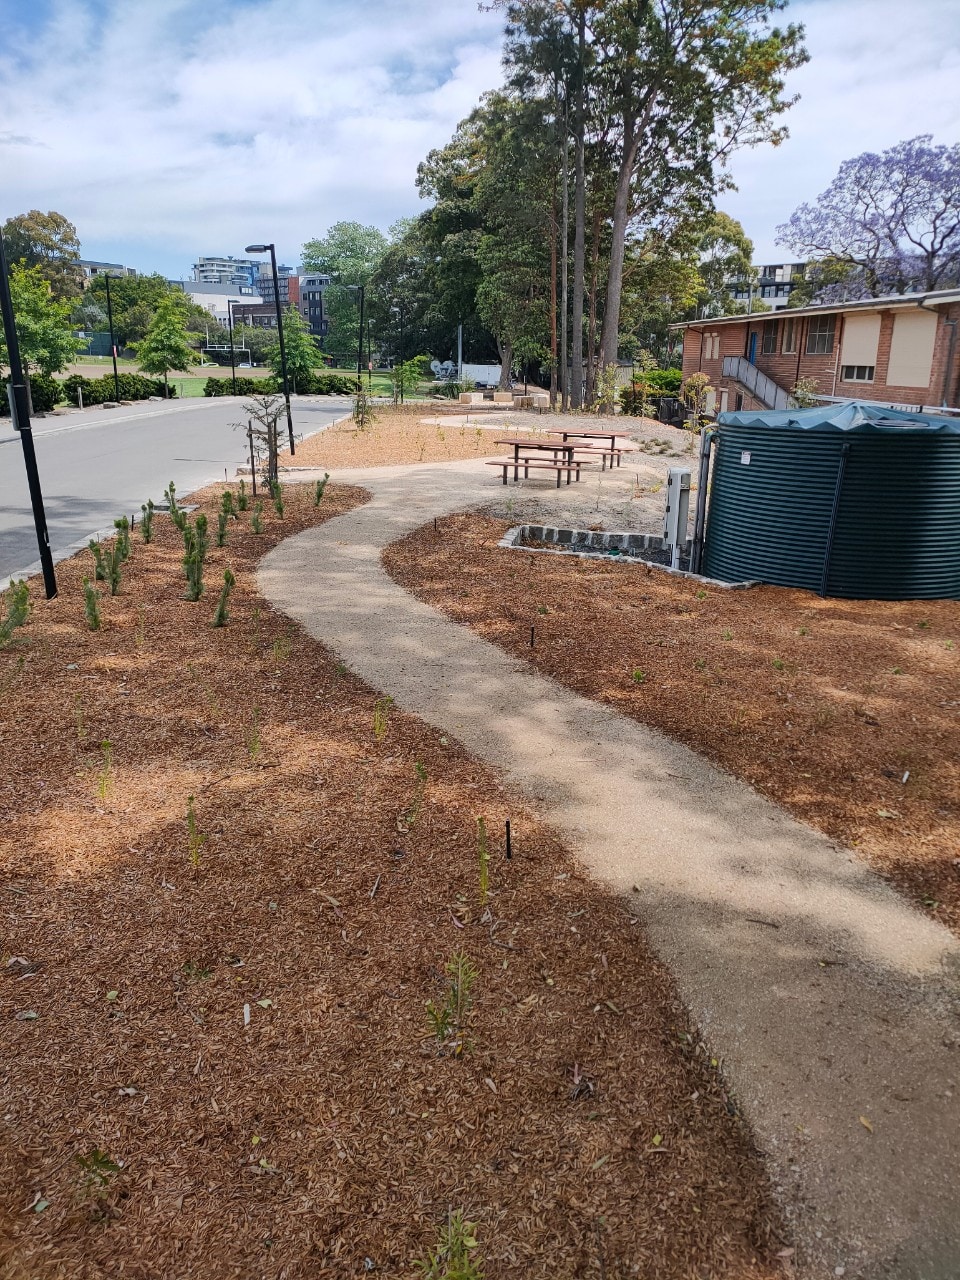 Image of newly planted garden with plants and woodchip mulch in foreground and rain tanks in background